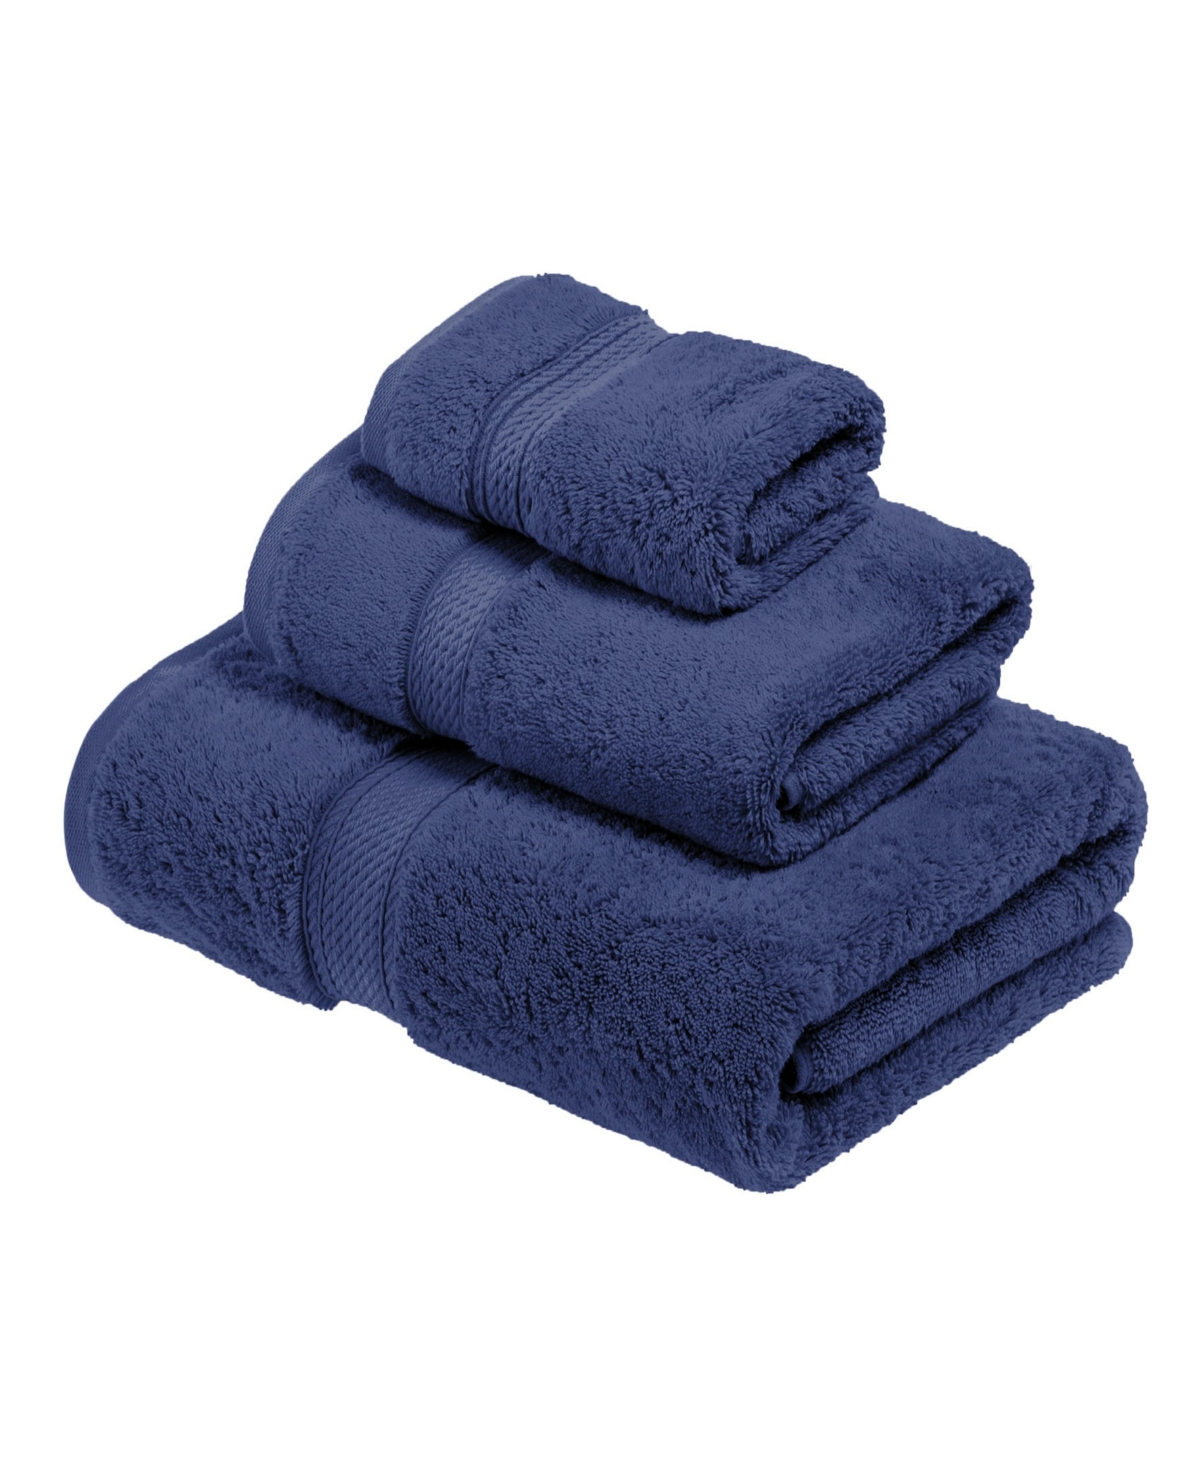 Superior Highly Absorbent Egyptian Cotton 3-piece Ultra Plush Solid Assorted Towel Set Bedding In Navy Blue